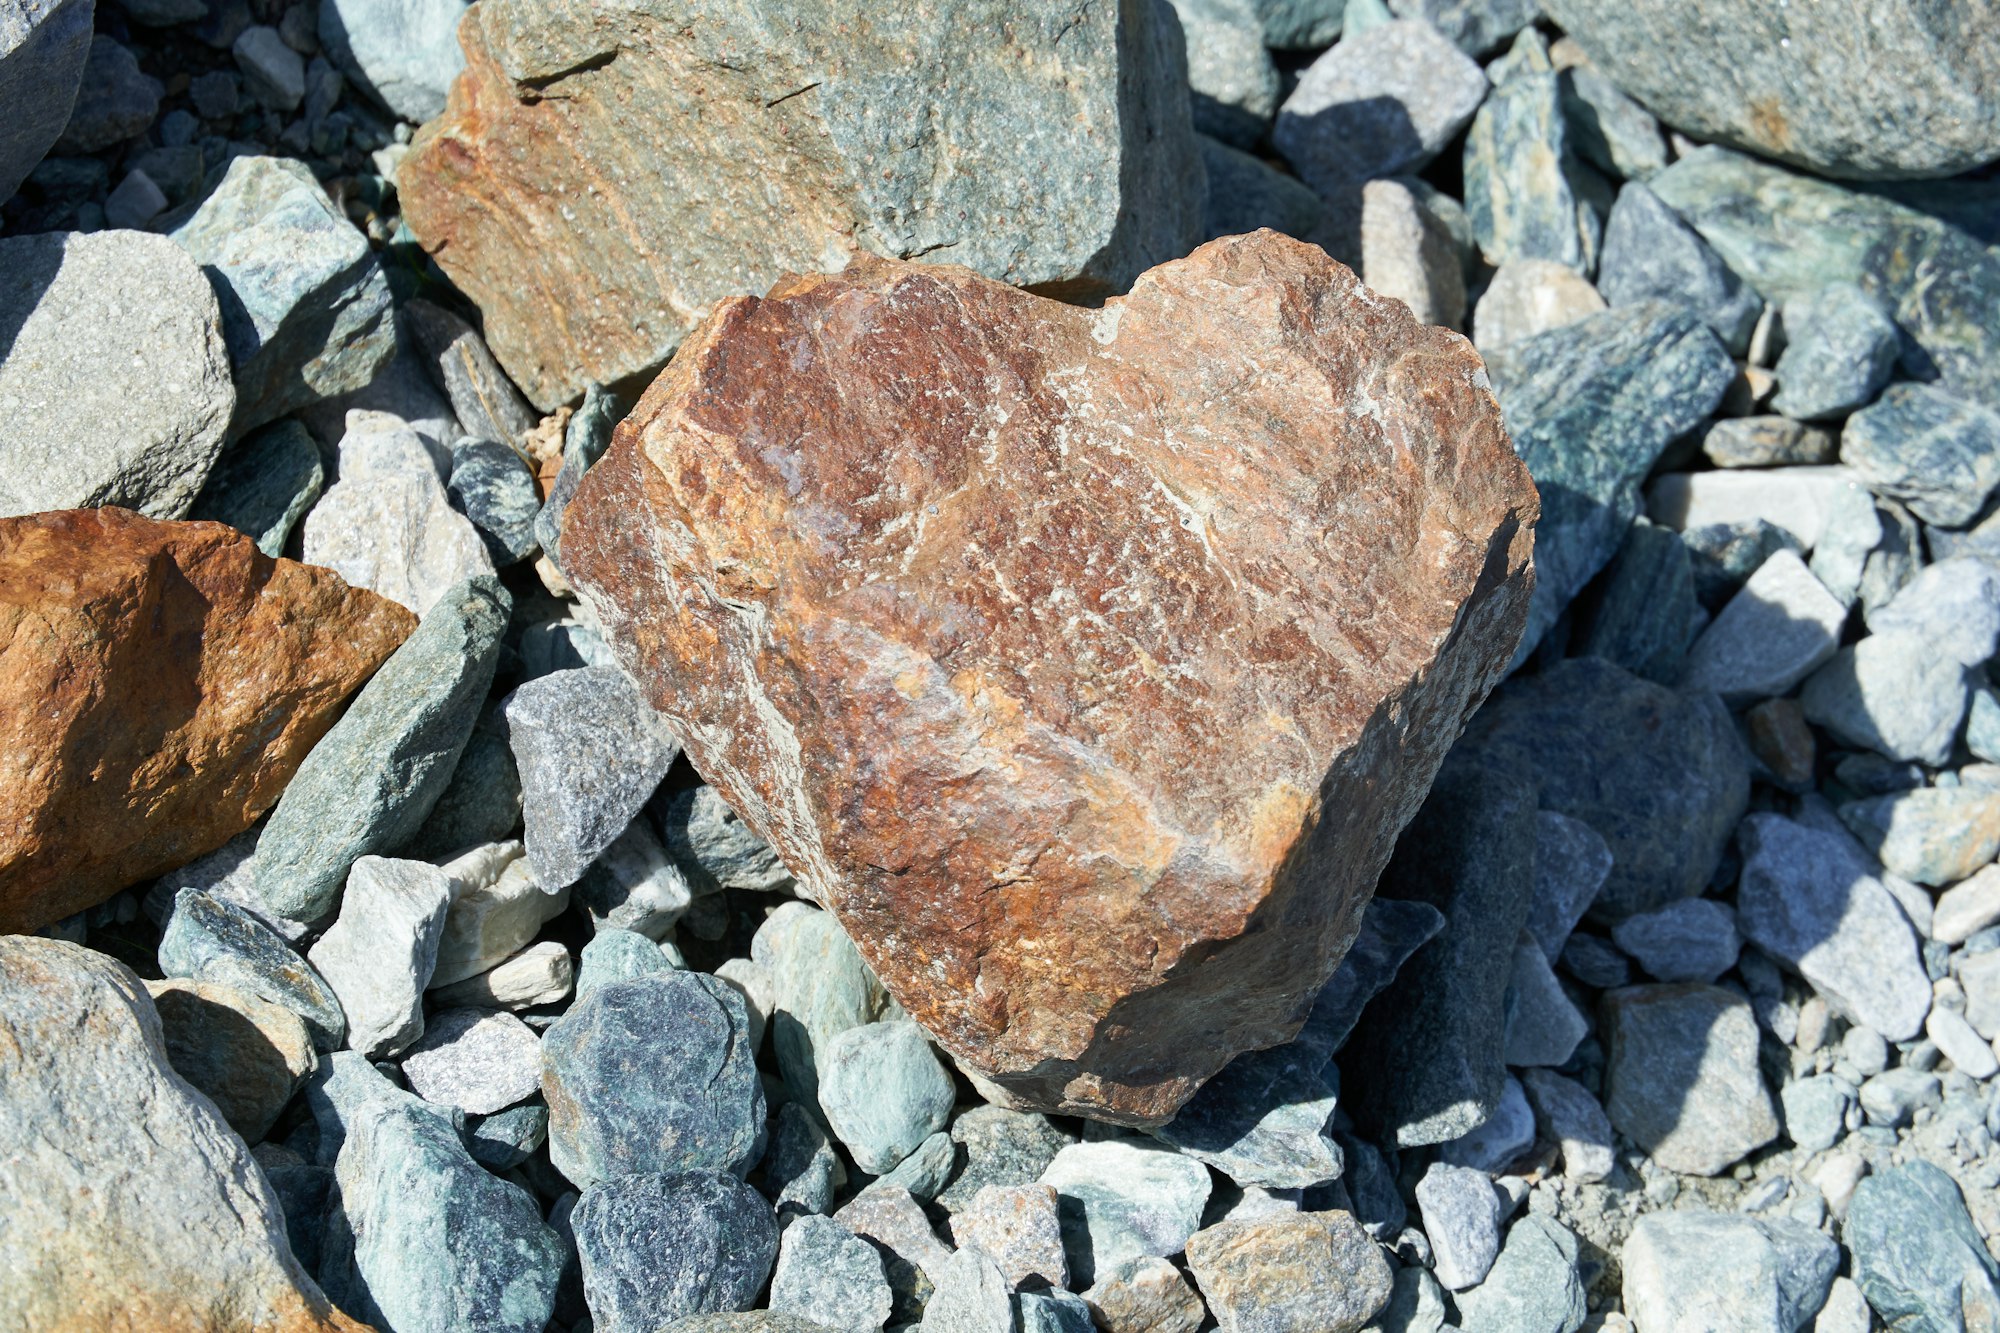 Heart-shaped stone atop smaller stones.